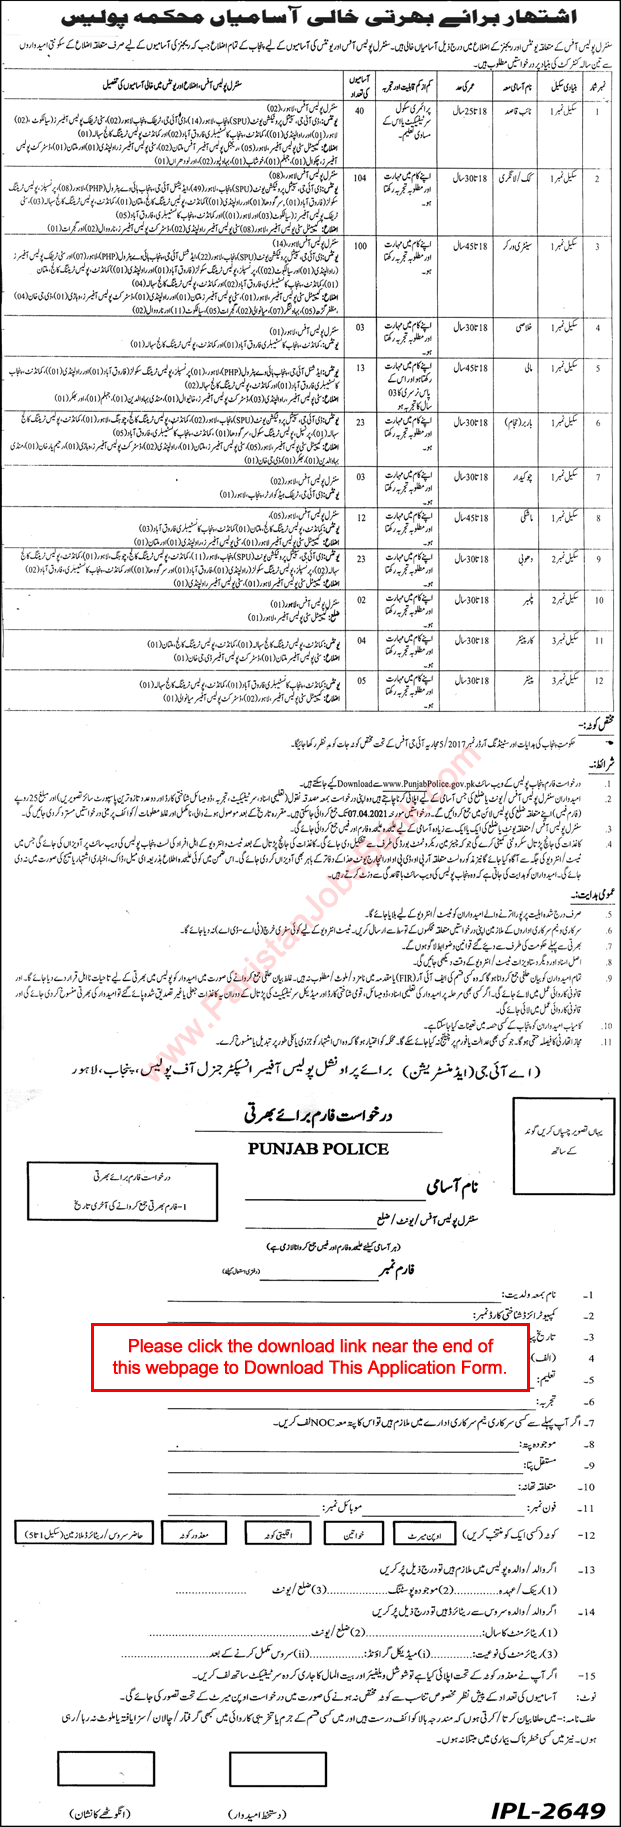 Punjab Police Jobs March 2021 Application Form Sanitary Workers, Cooks & Others Latest